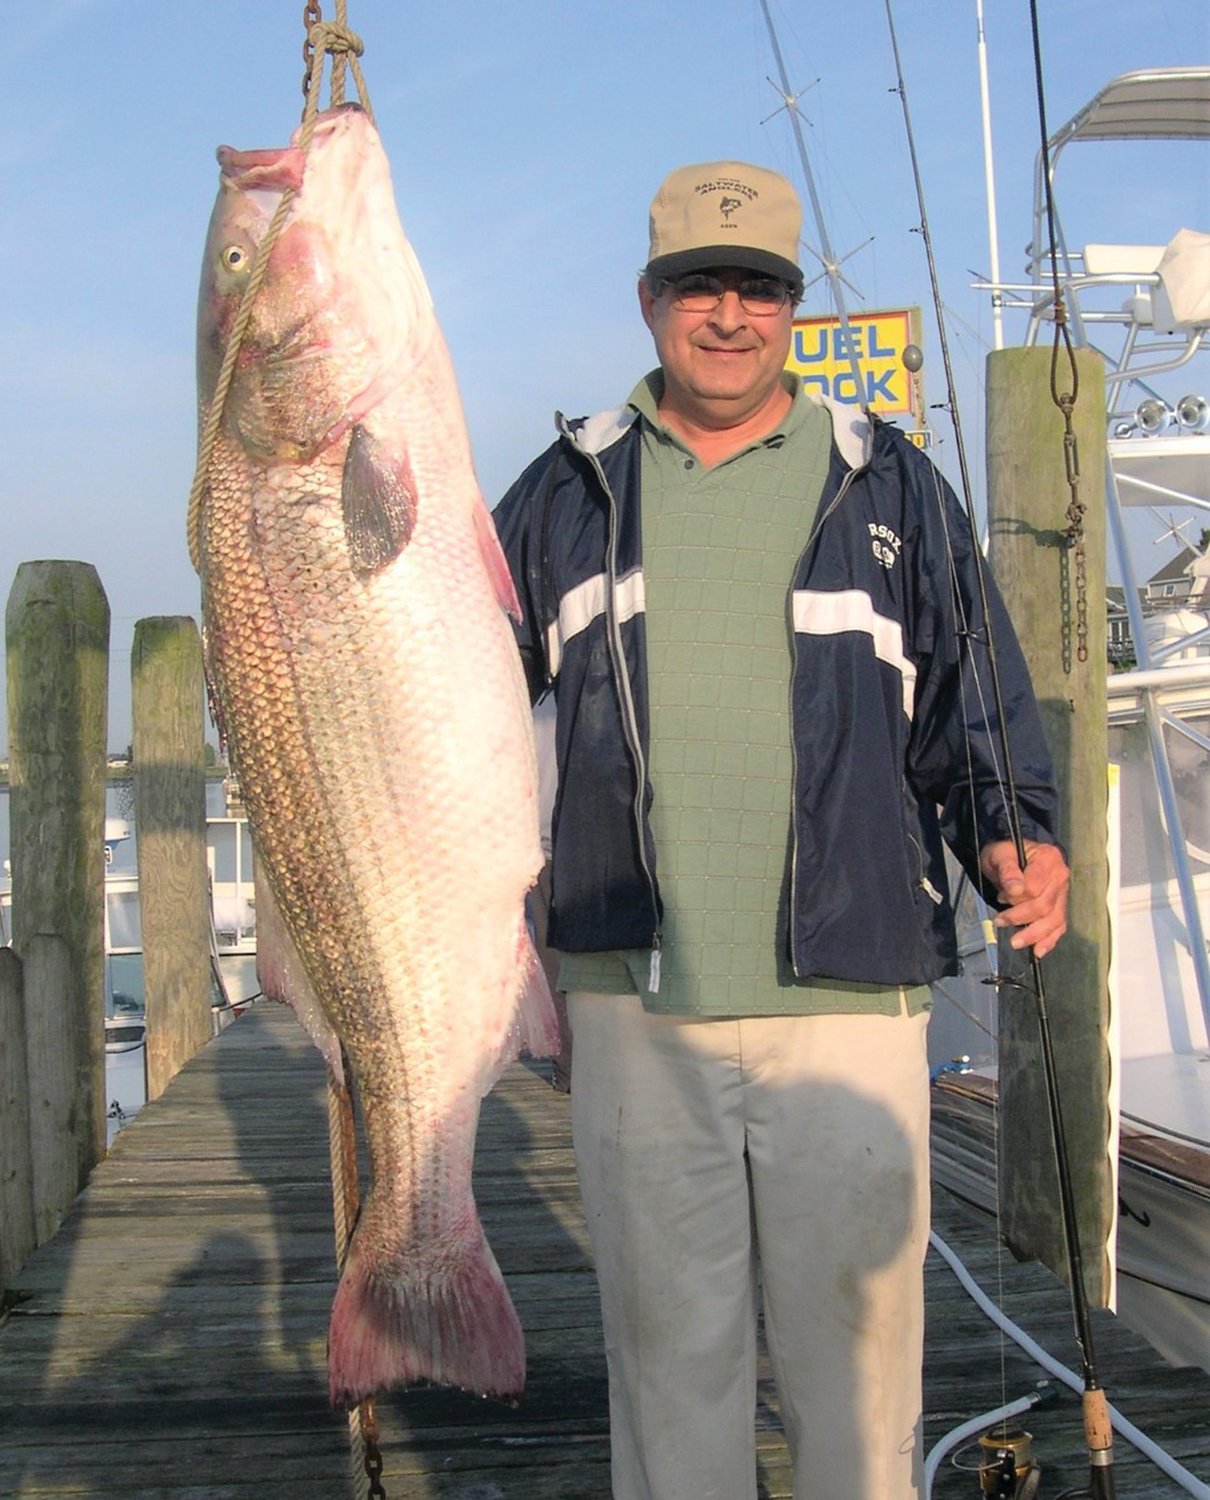 OLD SALTS AND YOUNG GUNS: Peter Vican’s 77-pound, 6.4 once striped bass is Rhode Island’s State record. Vican will be one of the guest speakers Monday, July 25 at a RI Saltwater Anglers Association seminar.